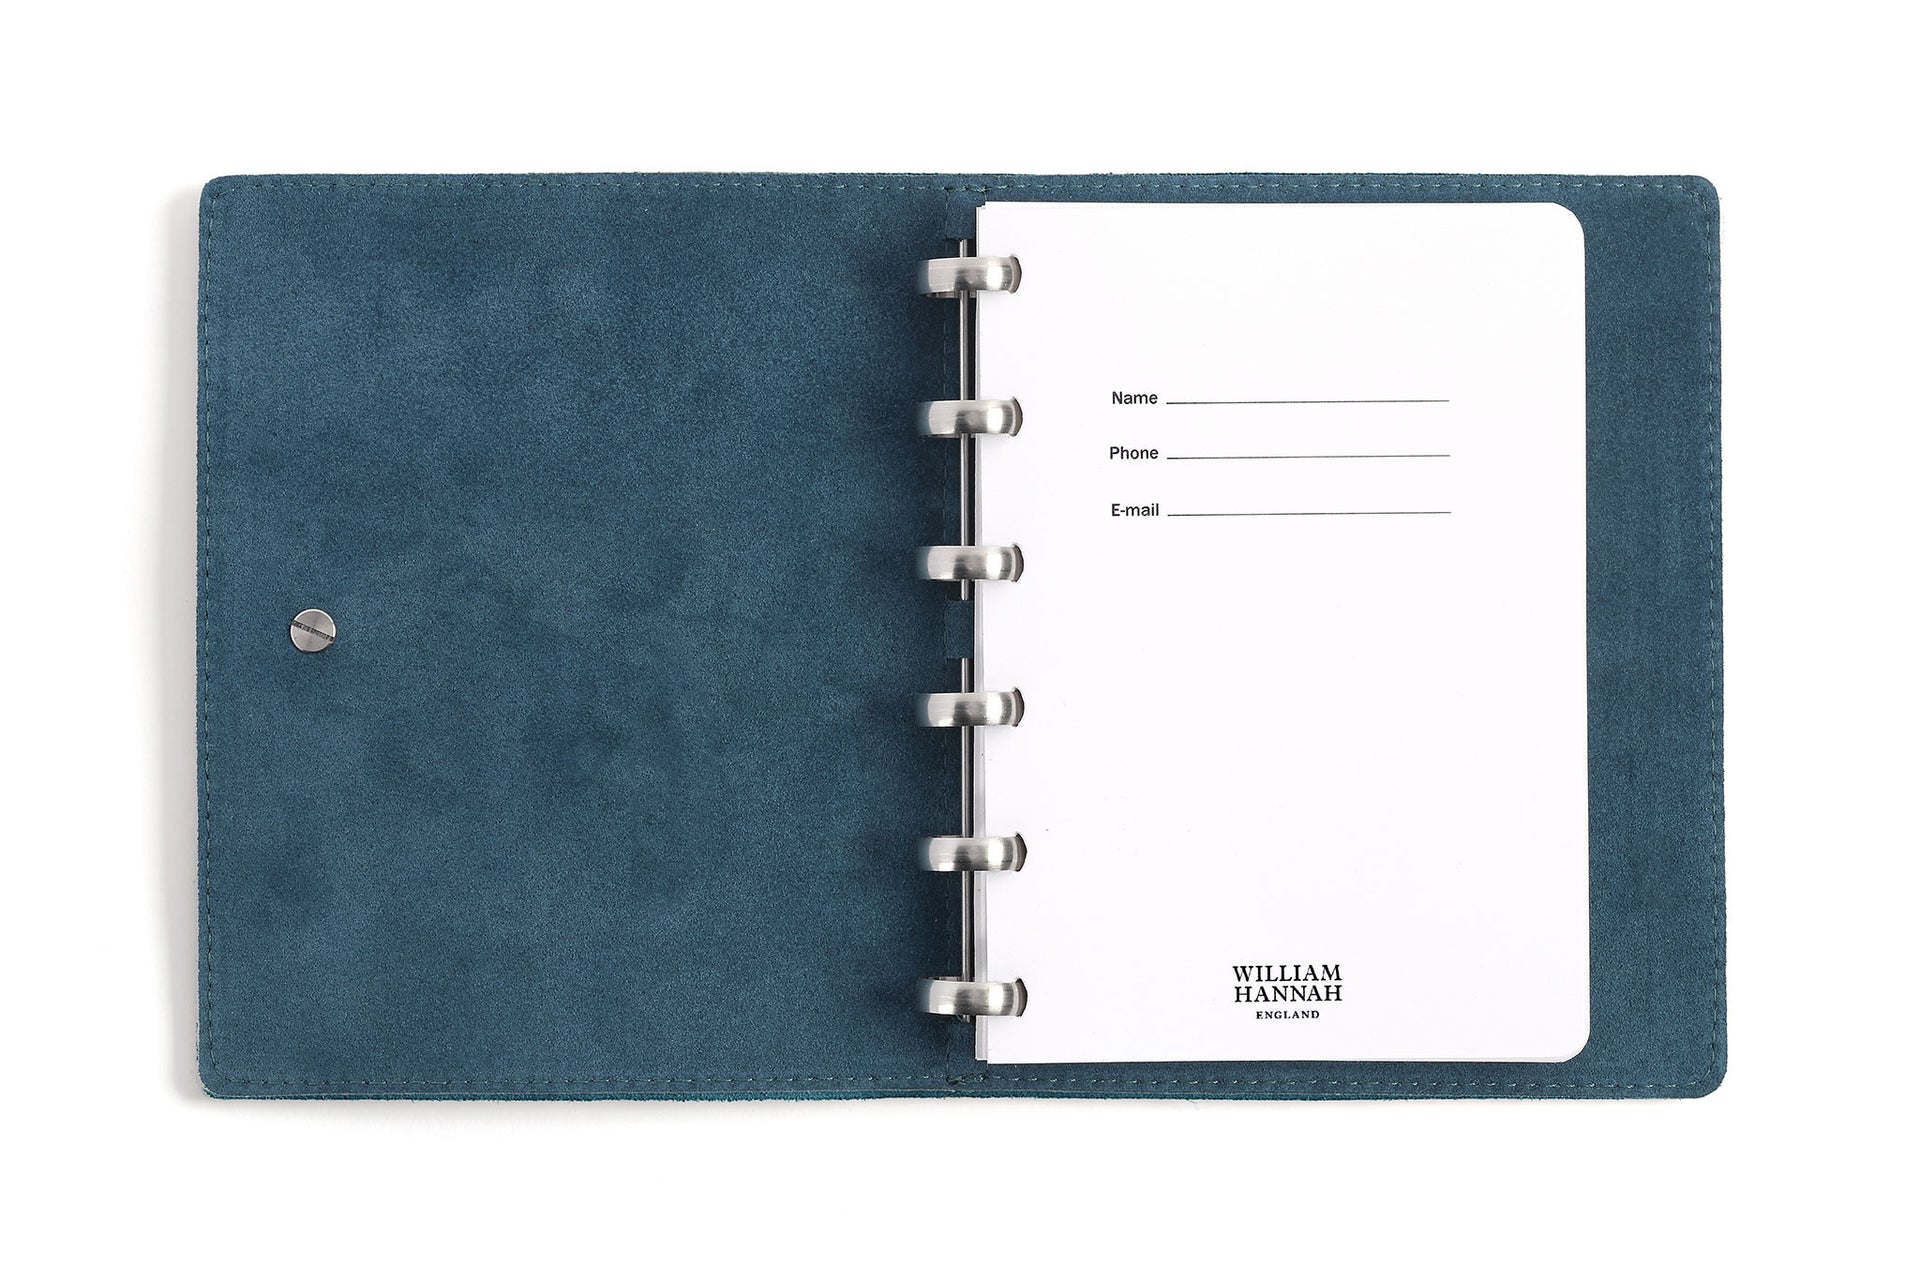 William Hannah bordeaux leather and blue suede A6 notebook: inside